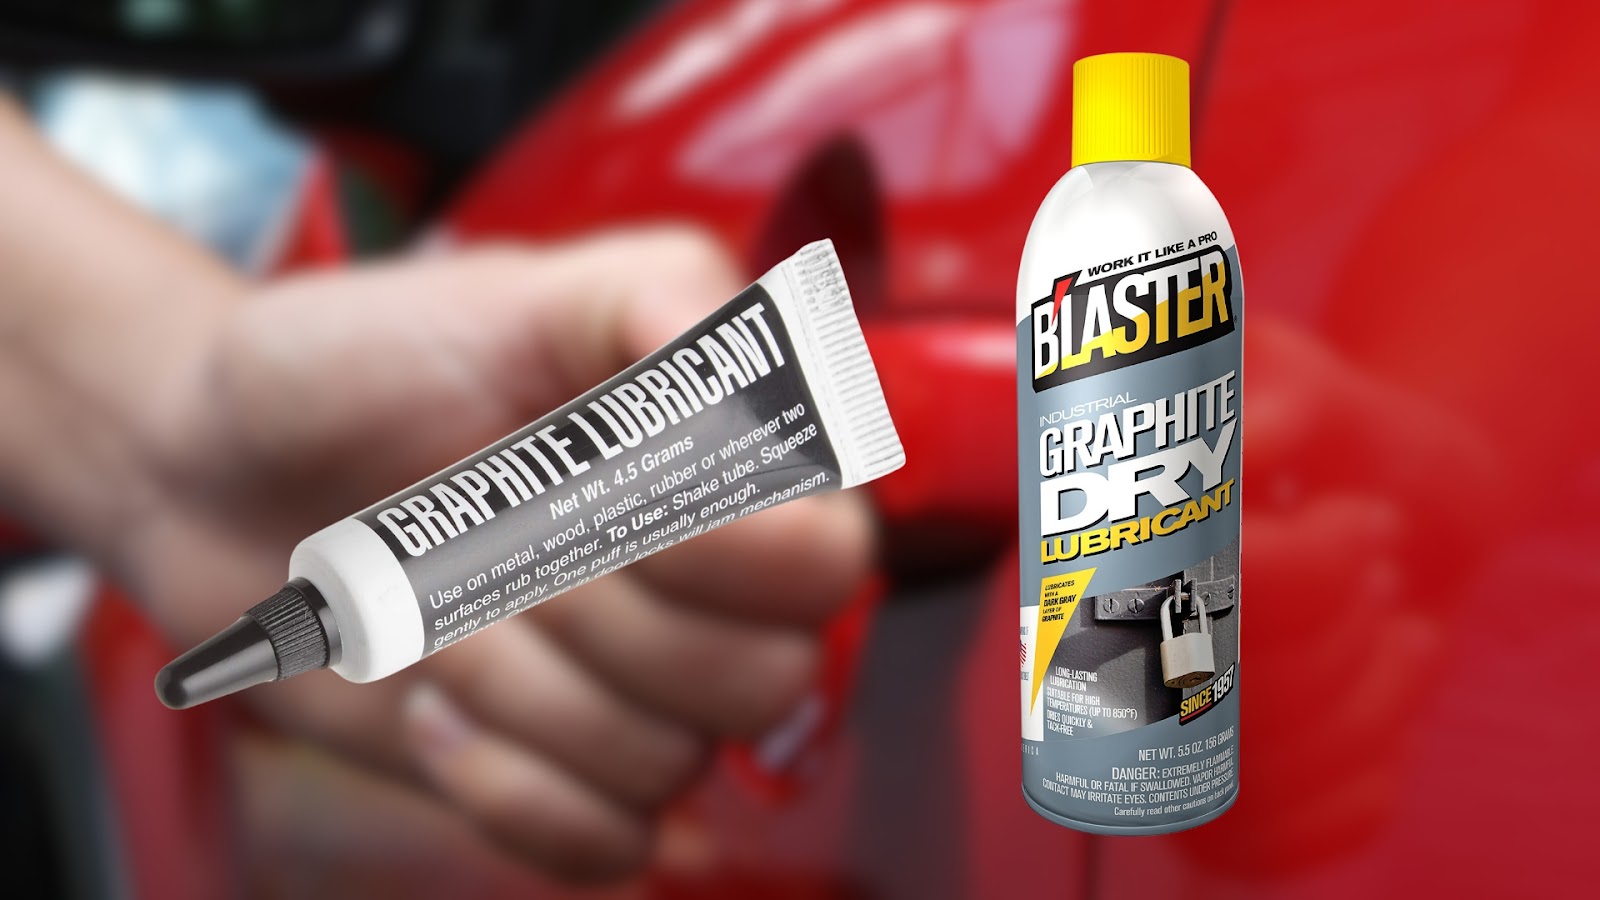 Graphite dry lubricant and graphite powder are shown as effective car lock lubrication solutions that prevent dirt and dust buildup.